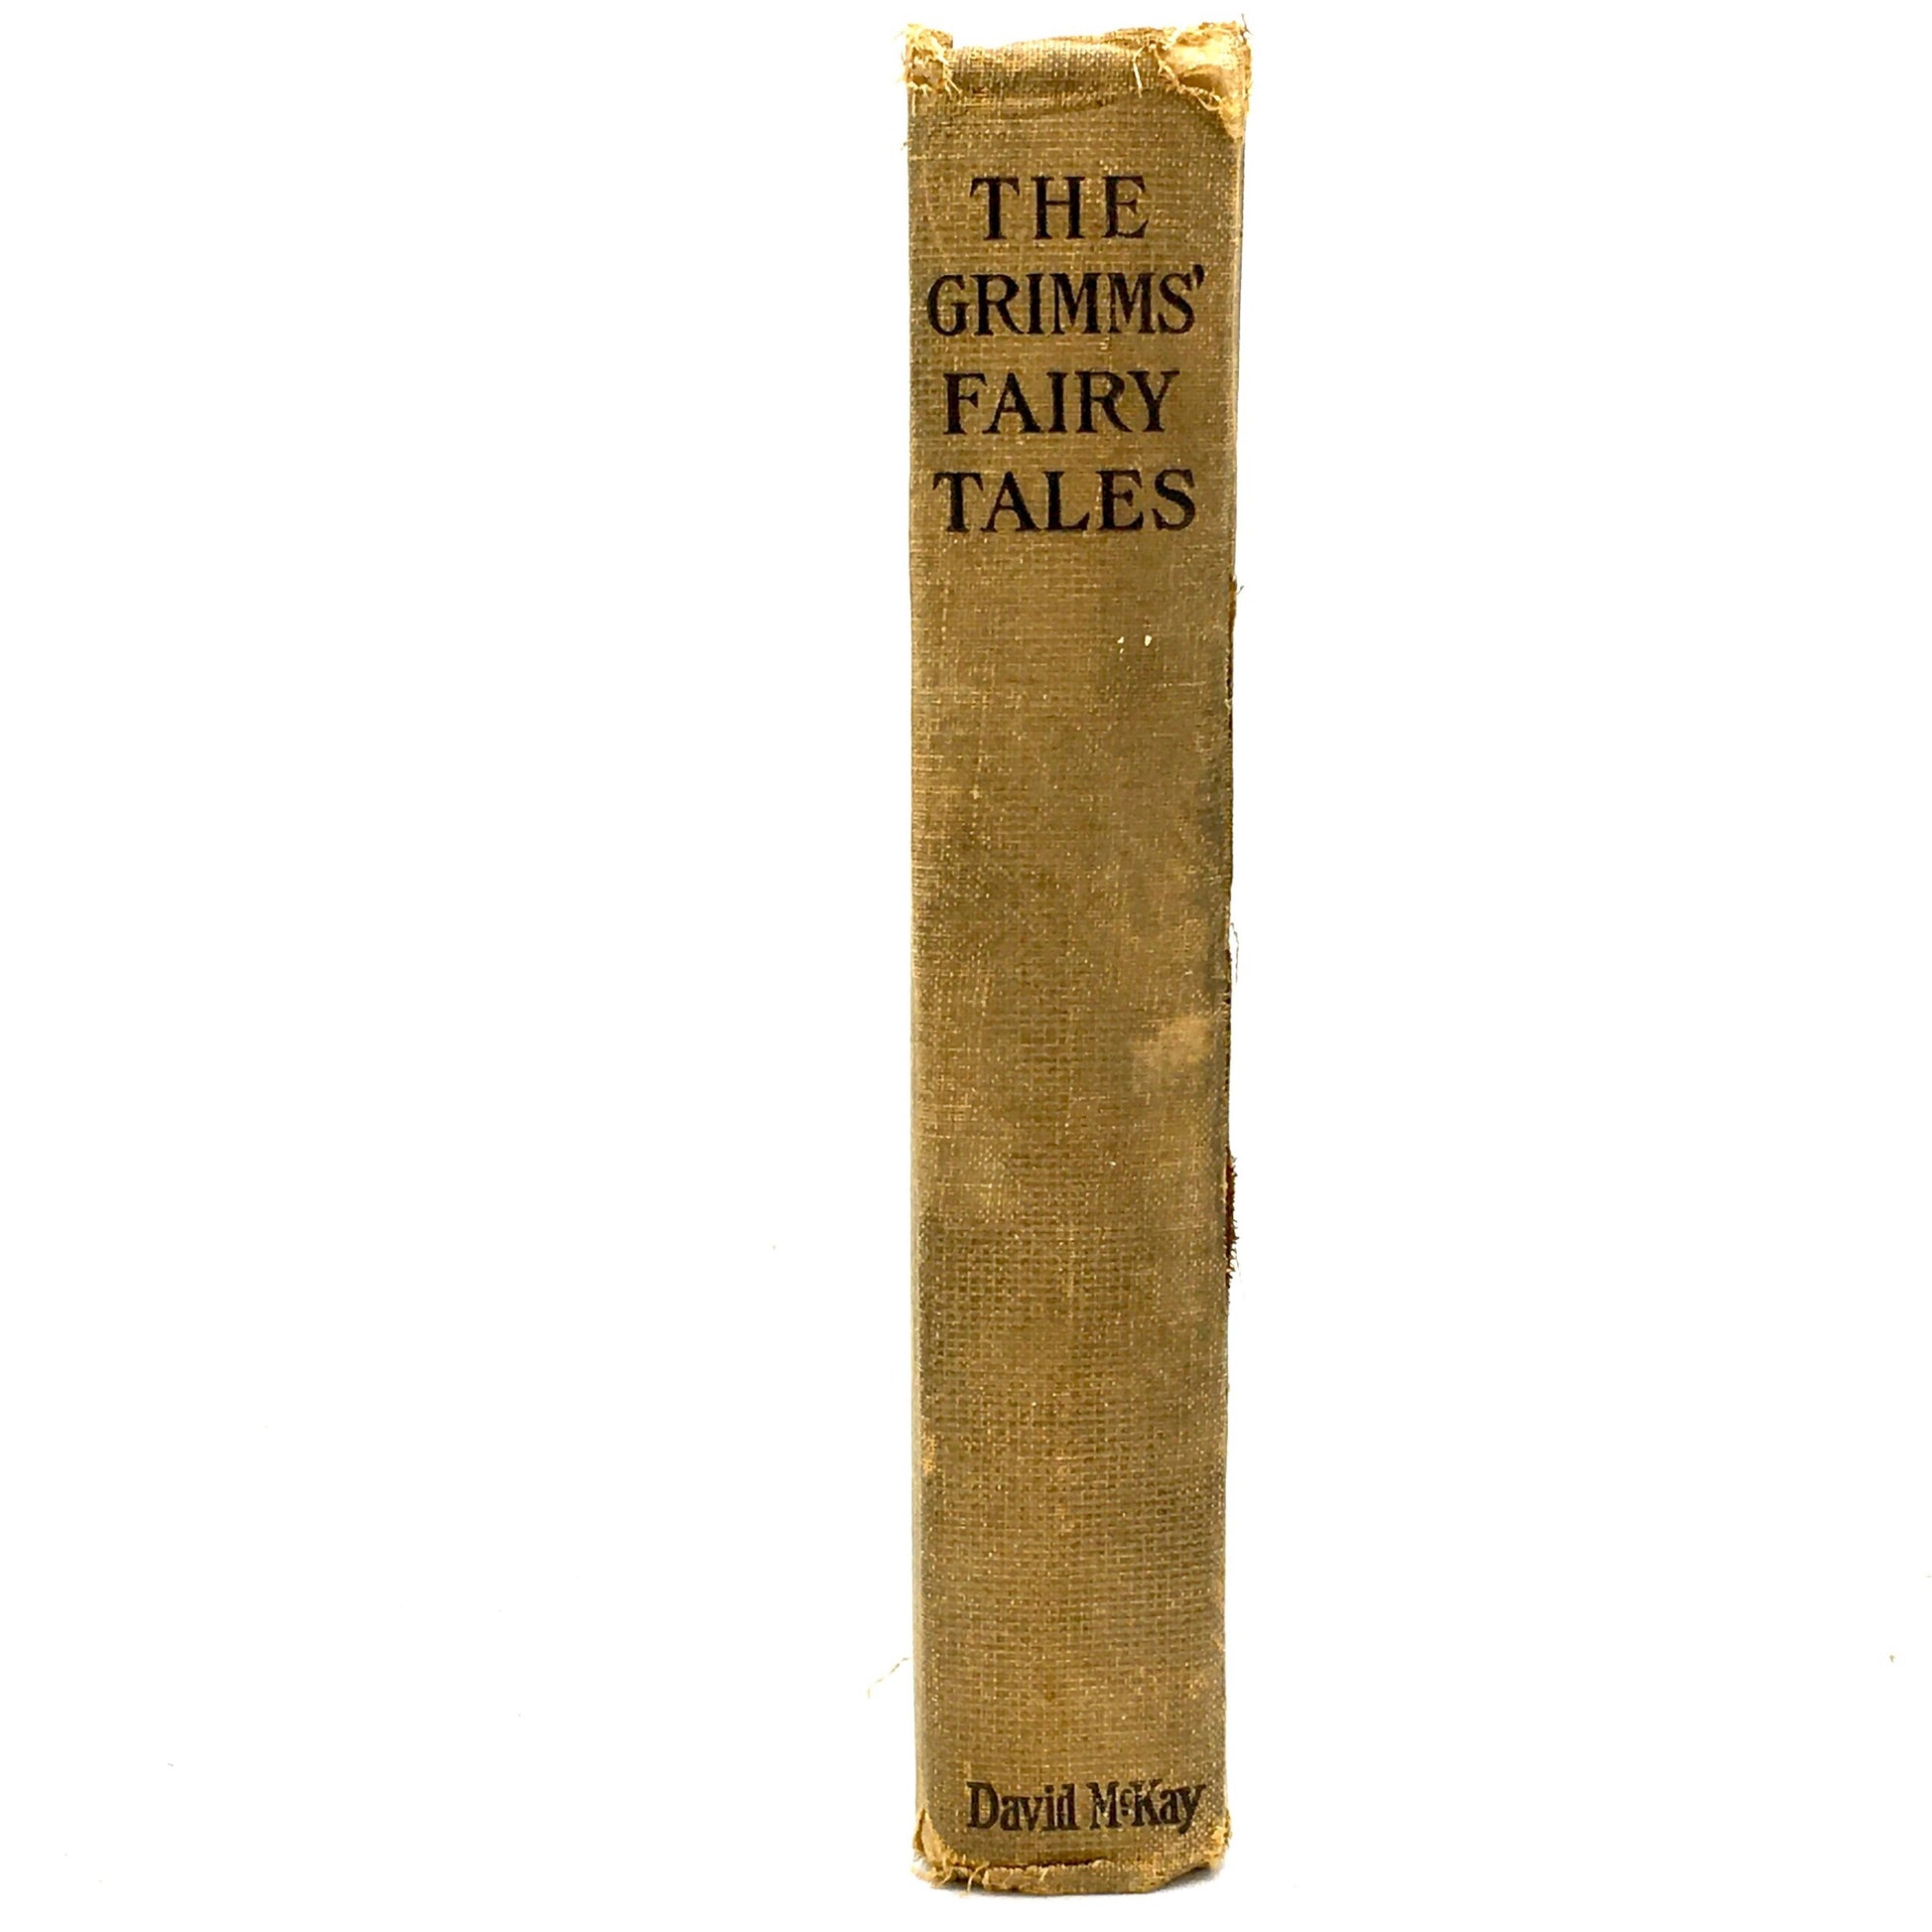 GRIMM, Brothers “Grimm’s Fairy Tales” [David McKay, c1930s] - Buzz Bookstore